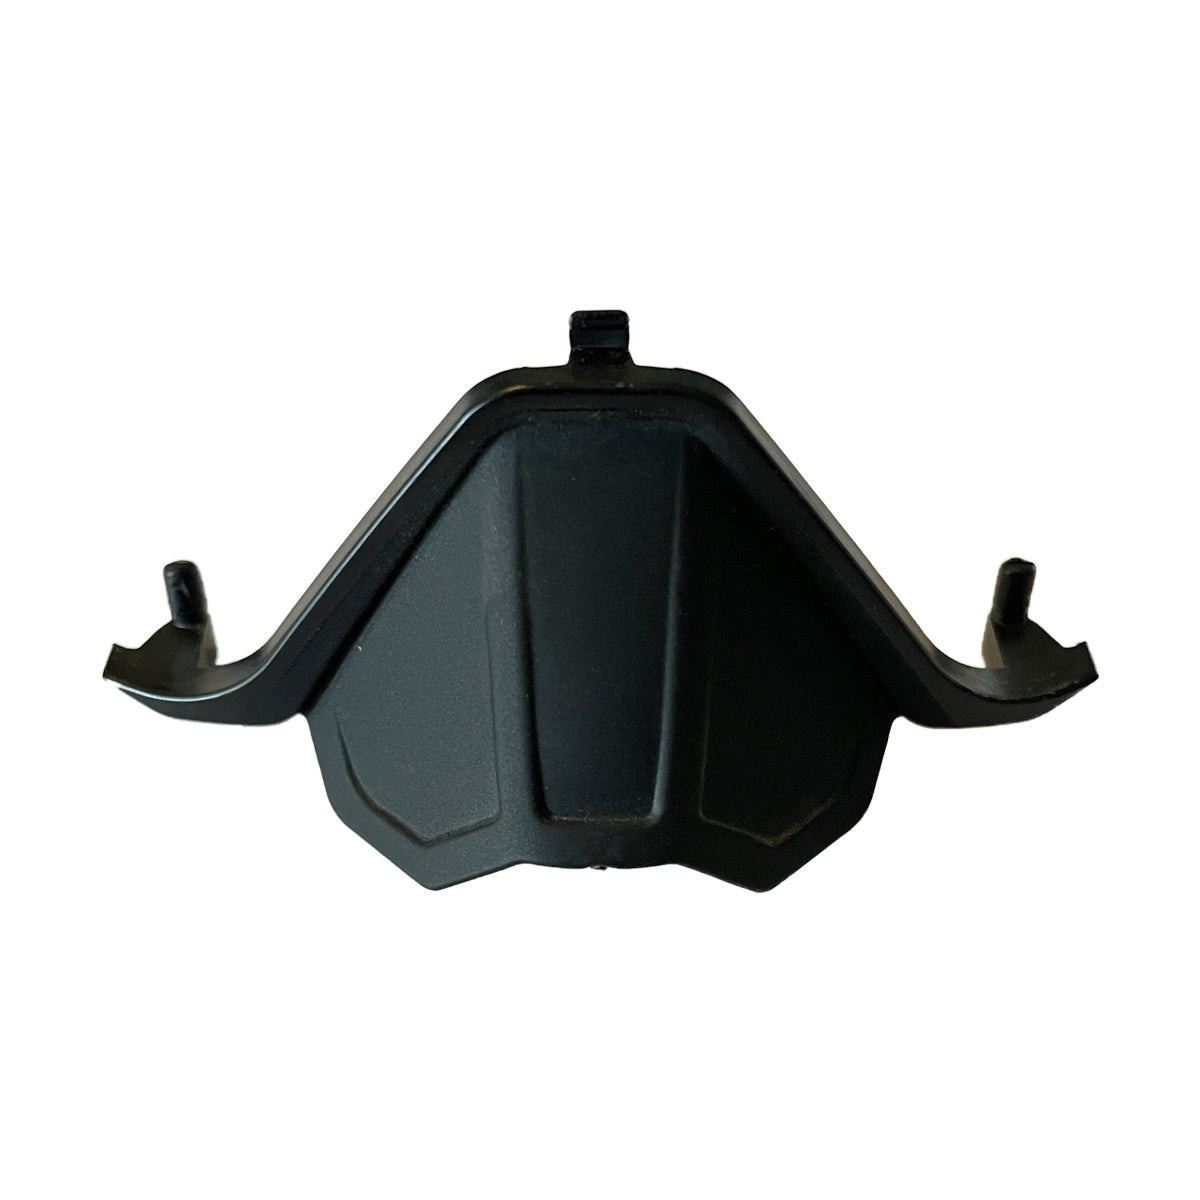 Nose Mask for Sinister X6 Goggles